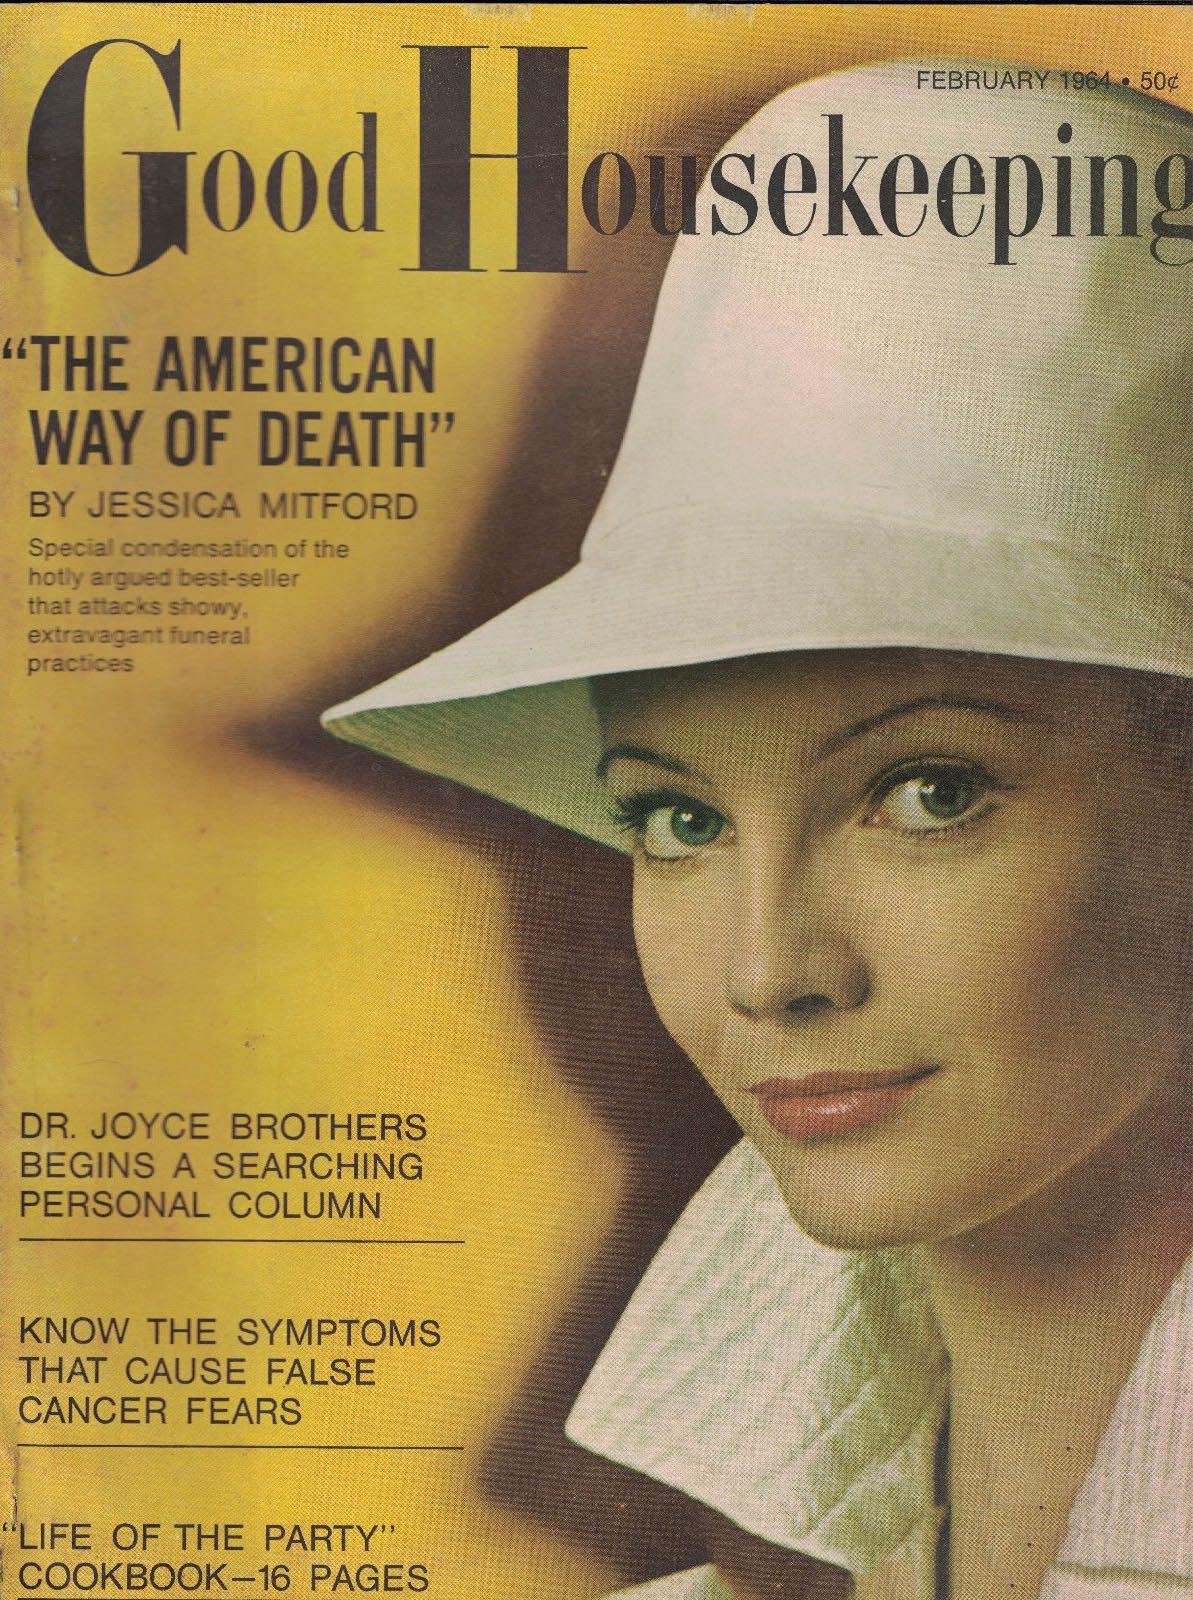 Good Housekeeping February 1964 magazine back issue Good Housekeeping magizine back copy Good Housekeeping February 1964 American womens magazine Back Issue Published by Hearst Publishing Corporation. The American Way Of Death By Jessica Mitford.